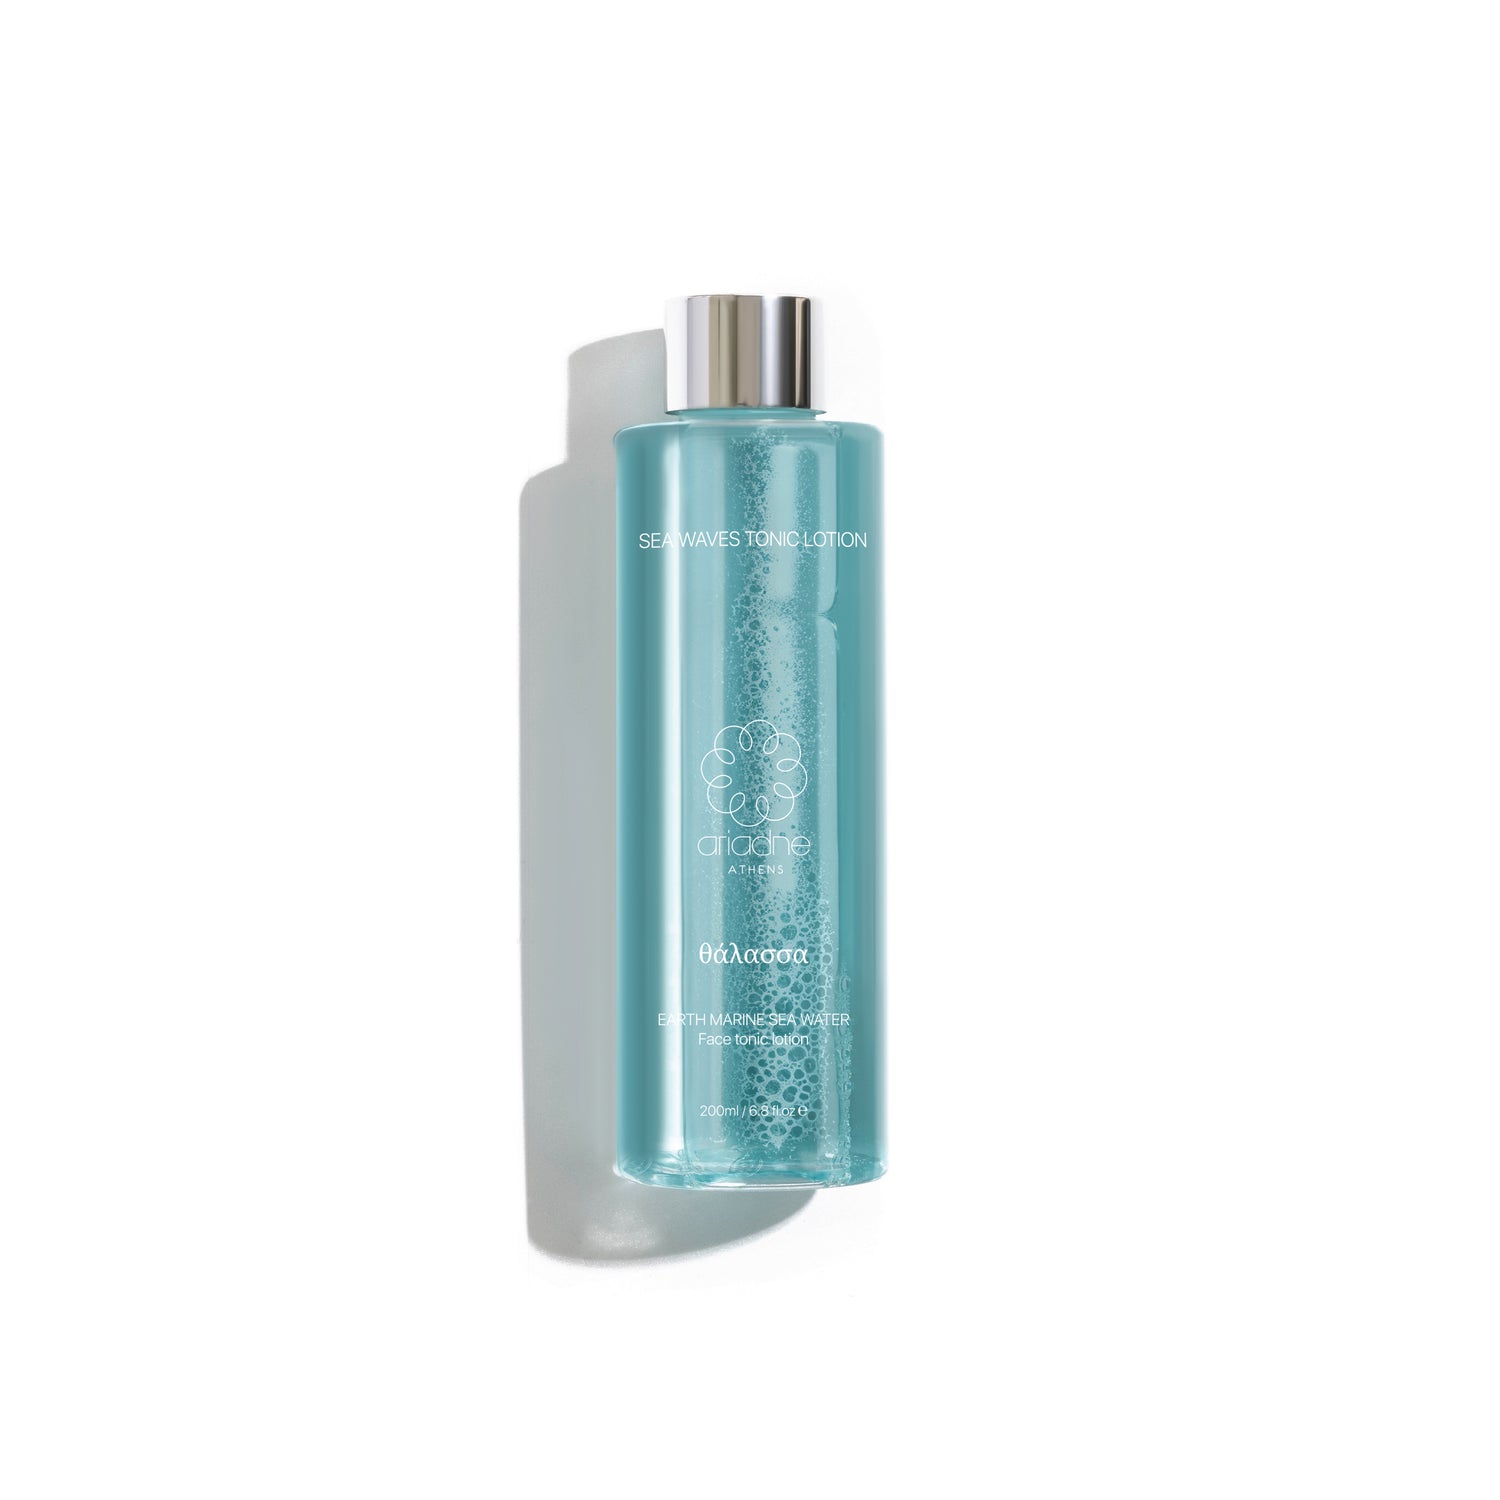 The Sea Waves Tonic Lotion front side.